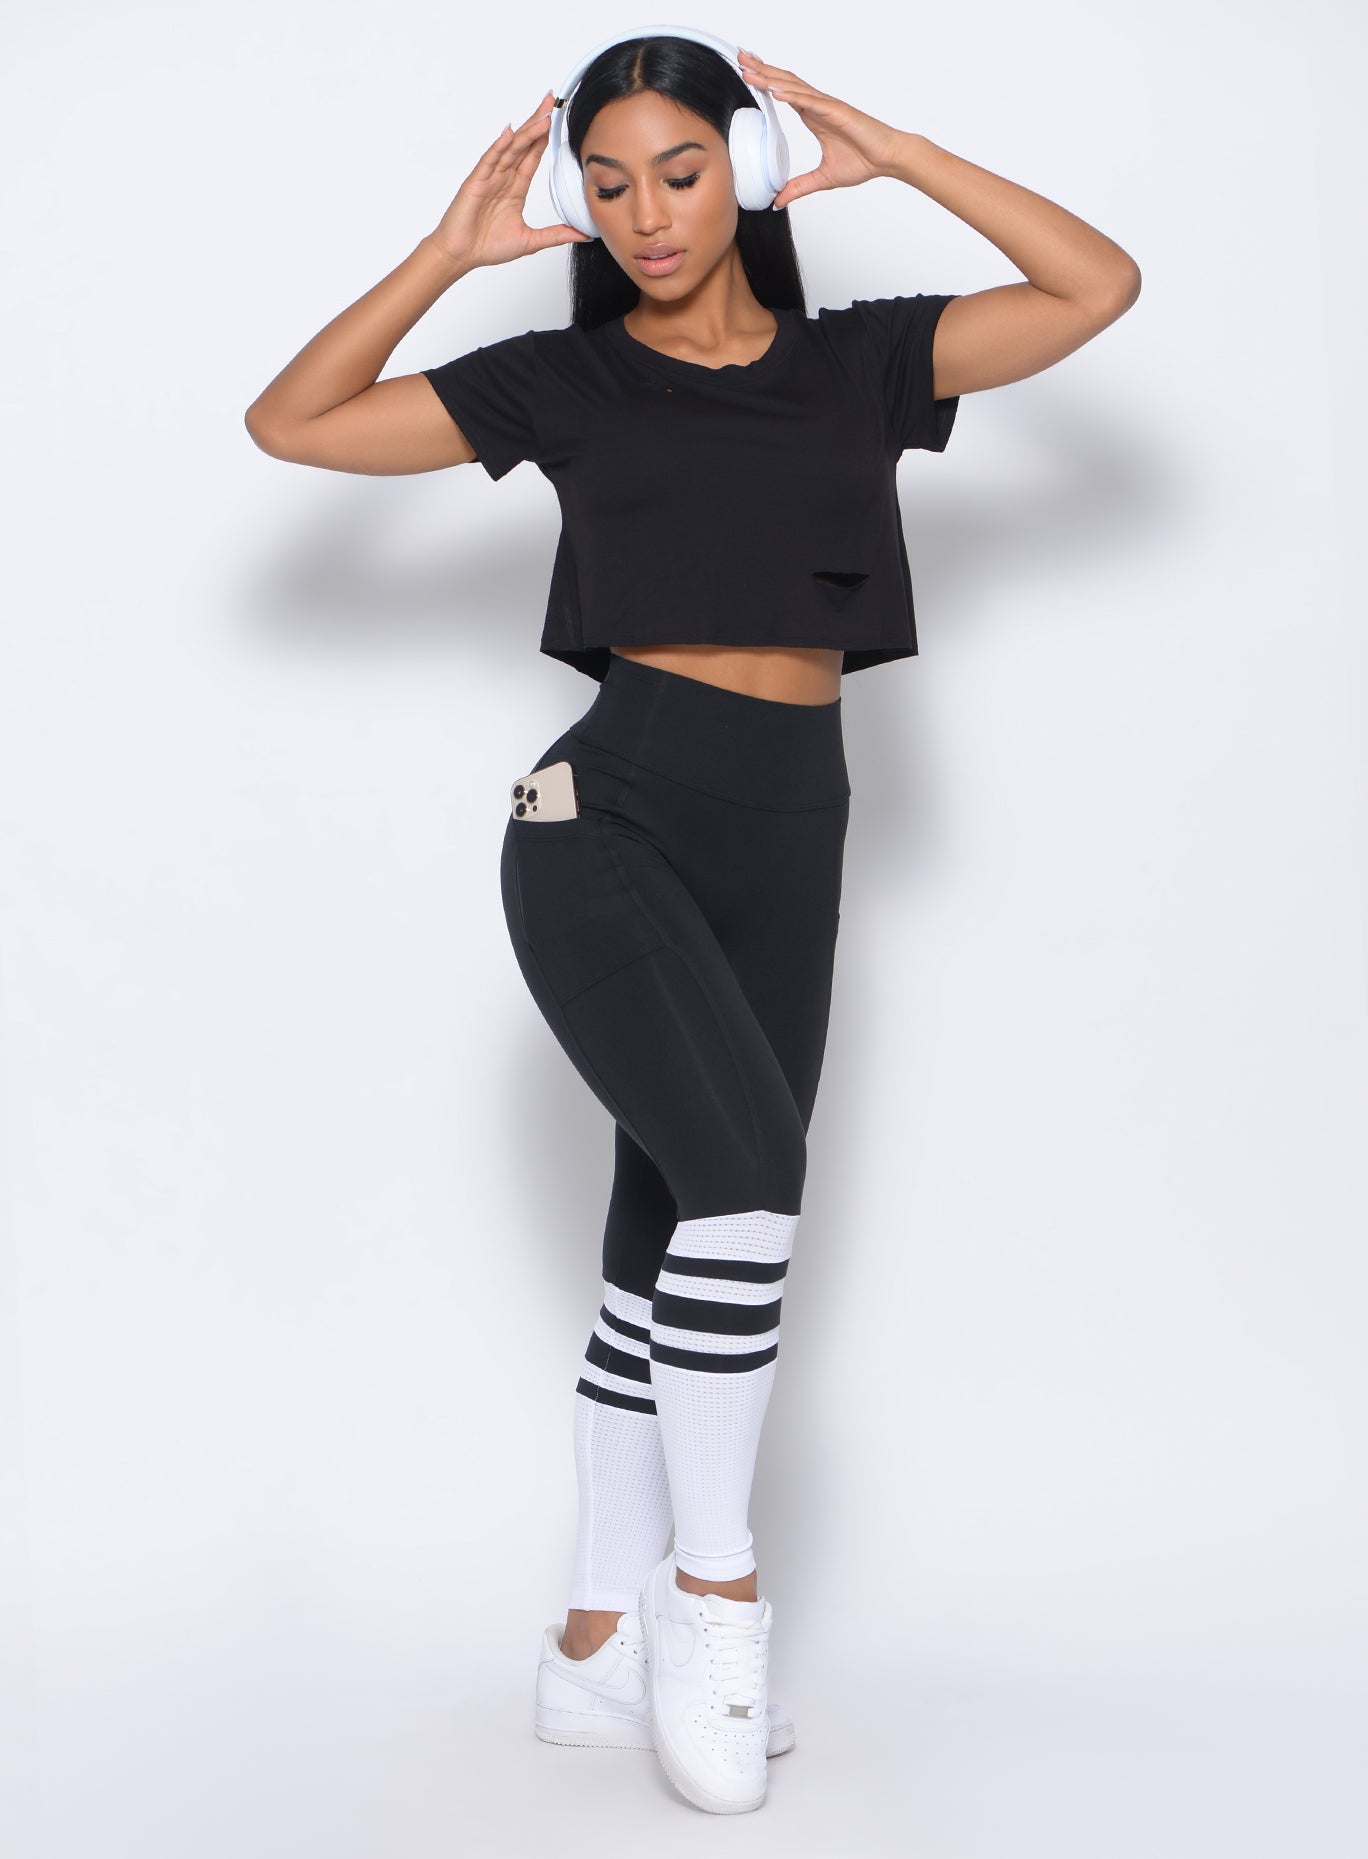 Front profile view of the model with her hands on a pair of headphones wearing our black perform sock leggings and a matching top